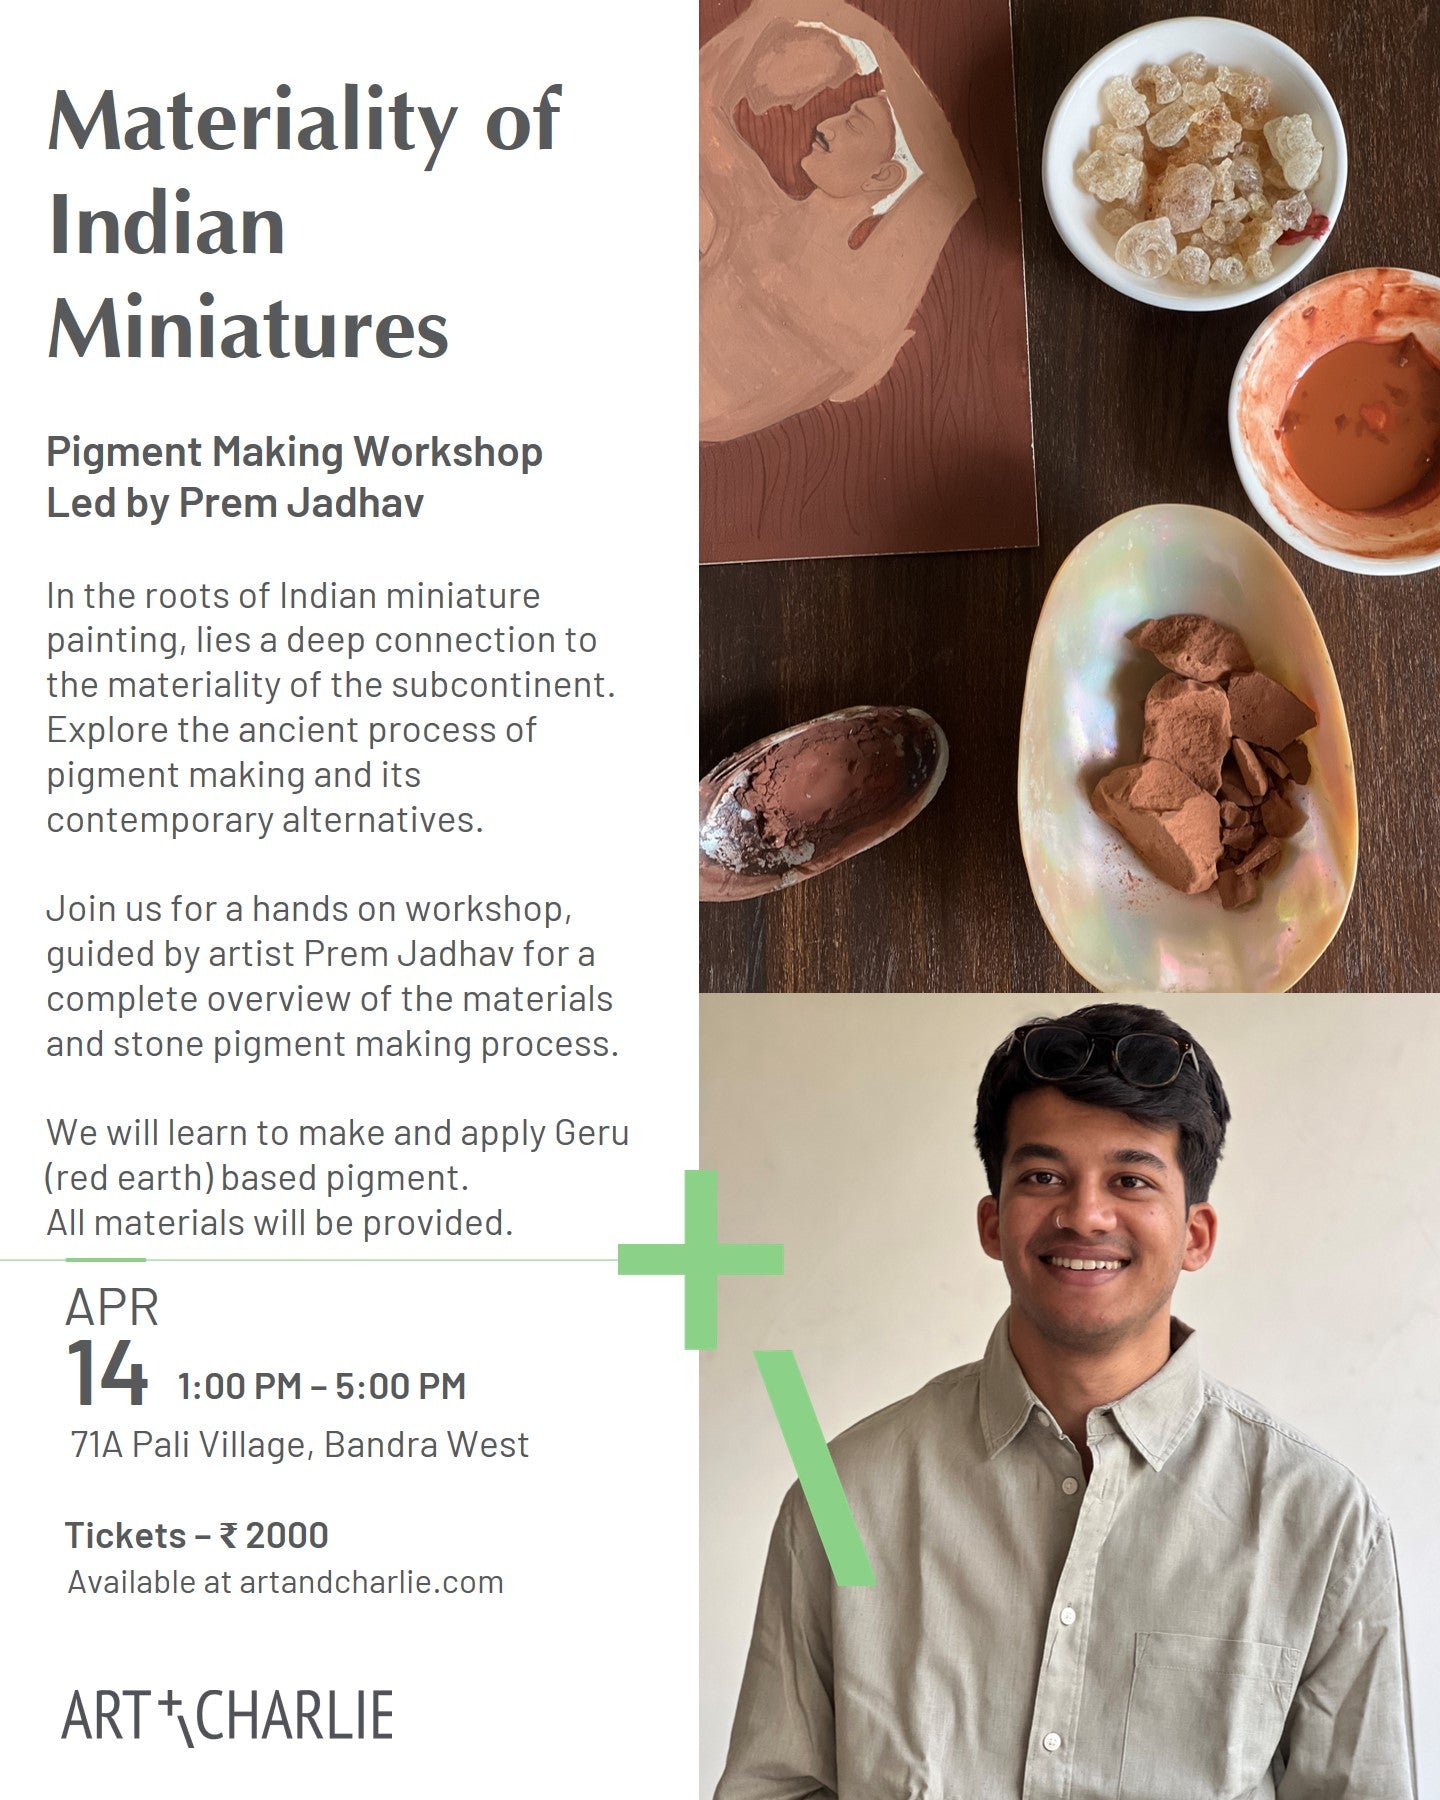 Ticket - Pigment Making Workshop: Materiality of Indian Miniatures - April 14 - 1 PM